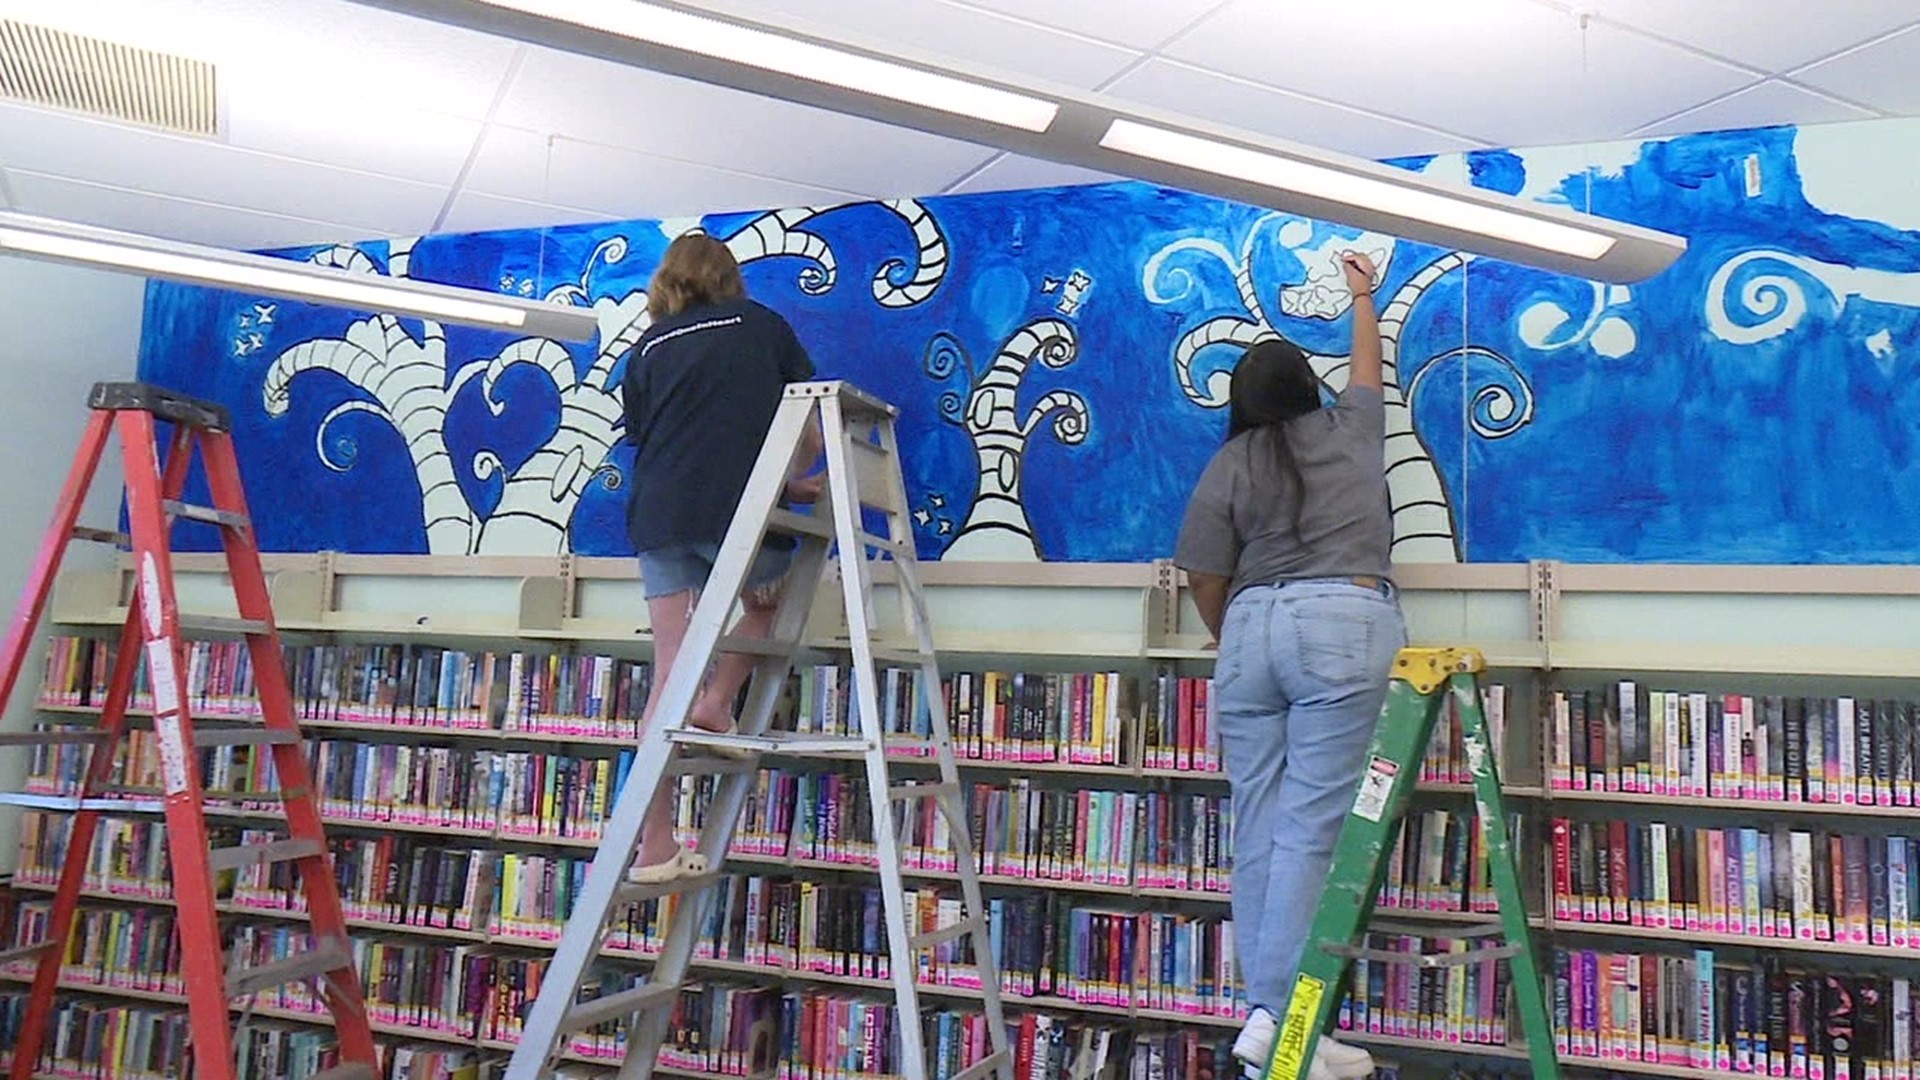 Newswatch 16's Jack Culkin shows us the new murals that showcase the art skills of students from Riverside High.